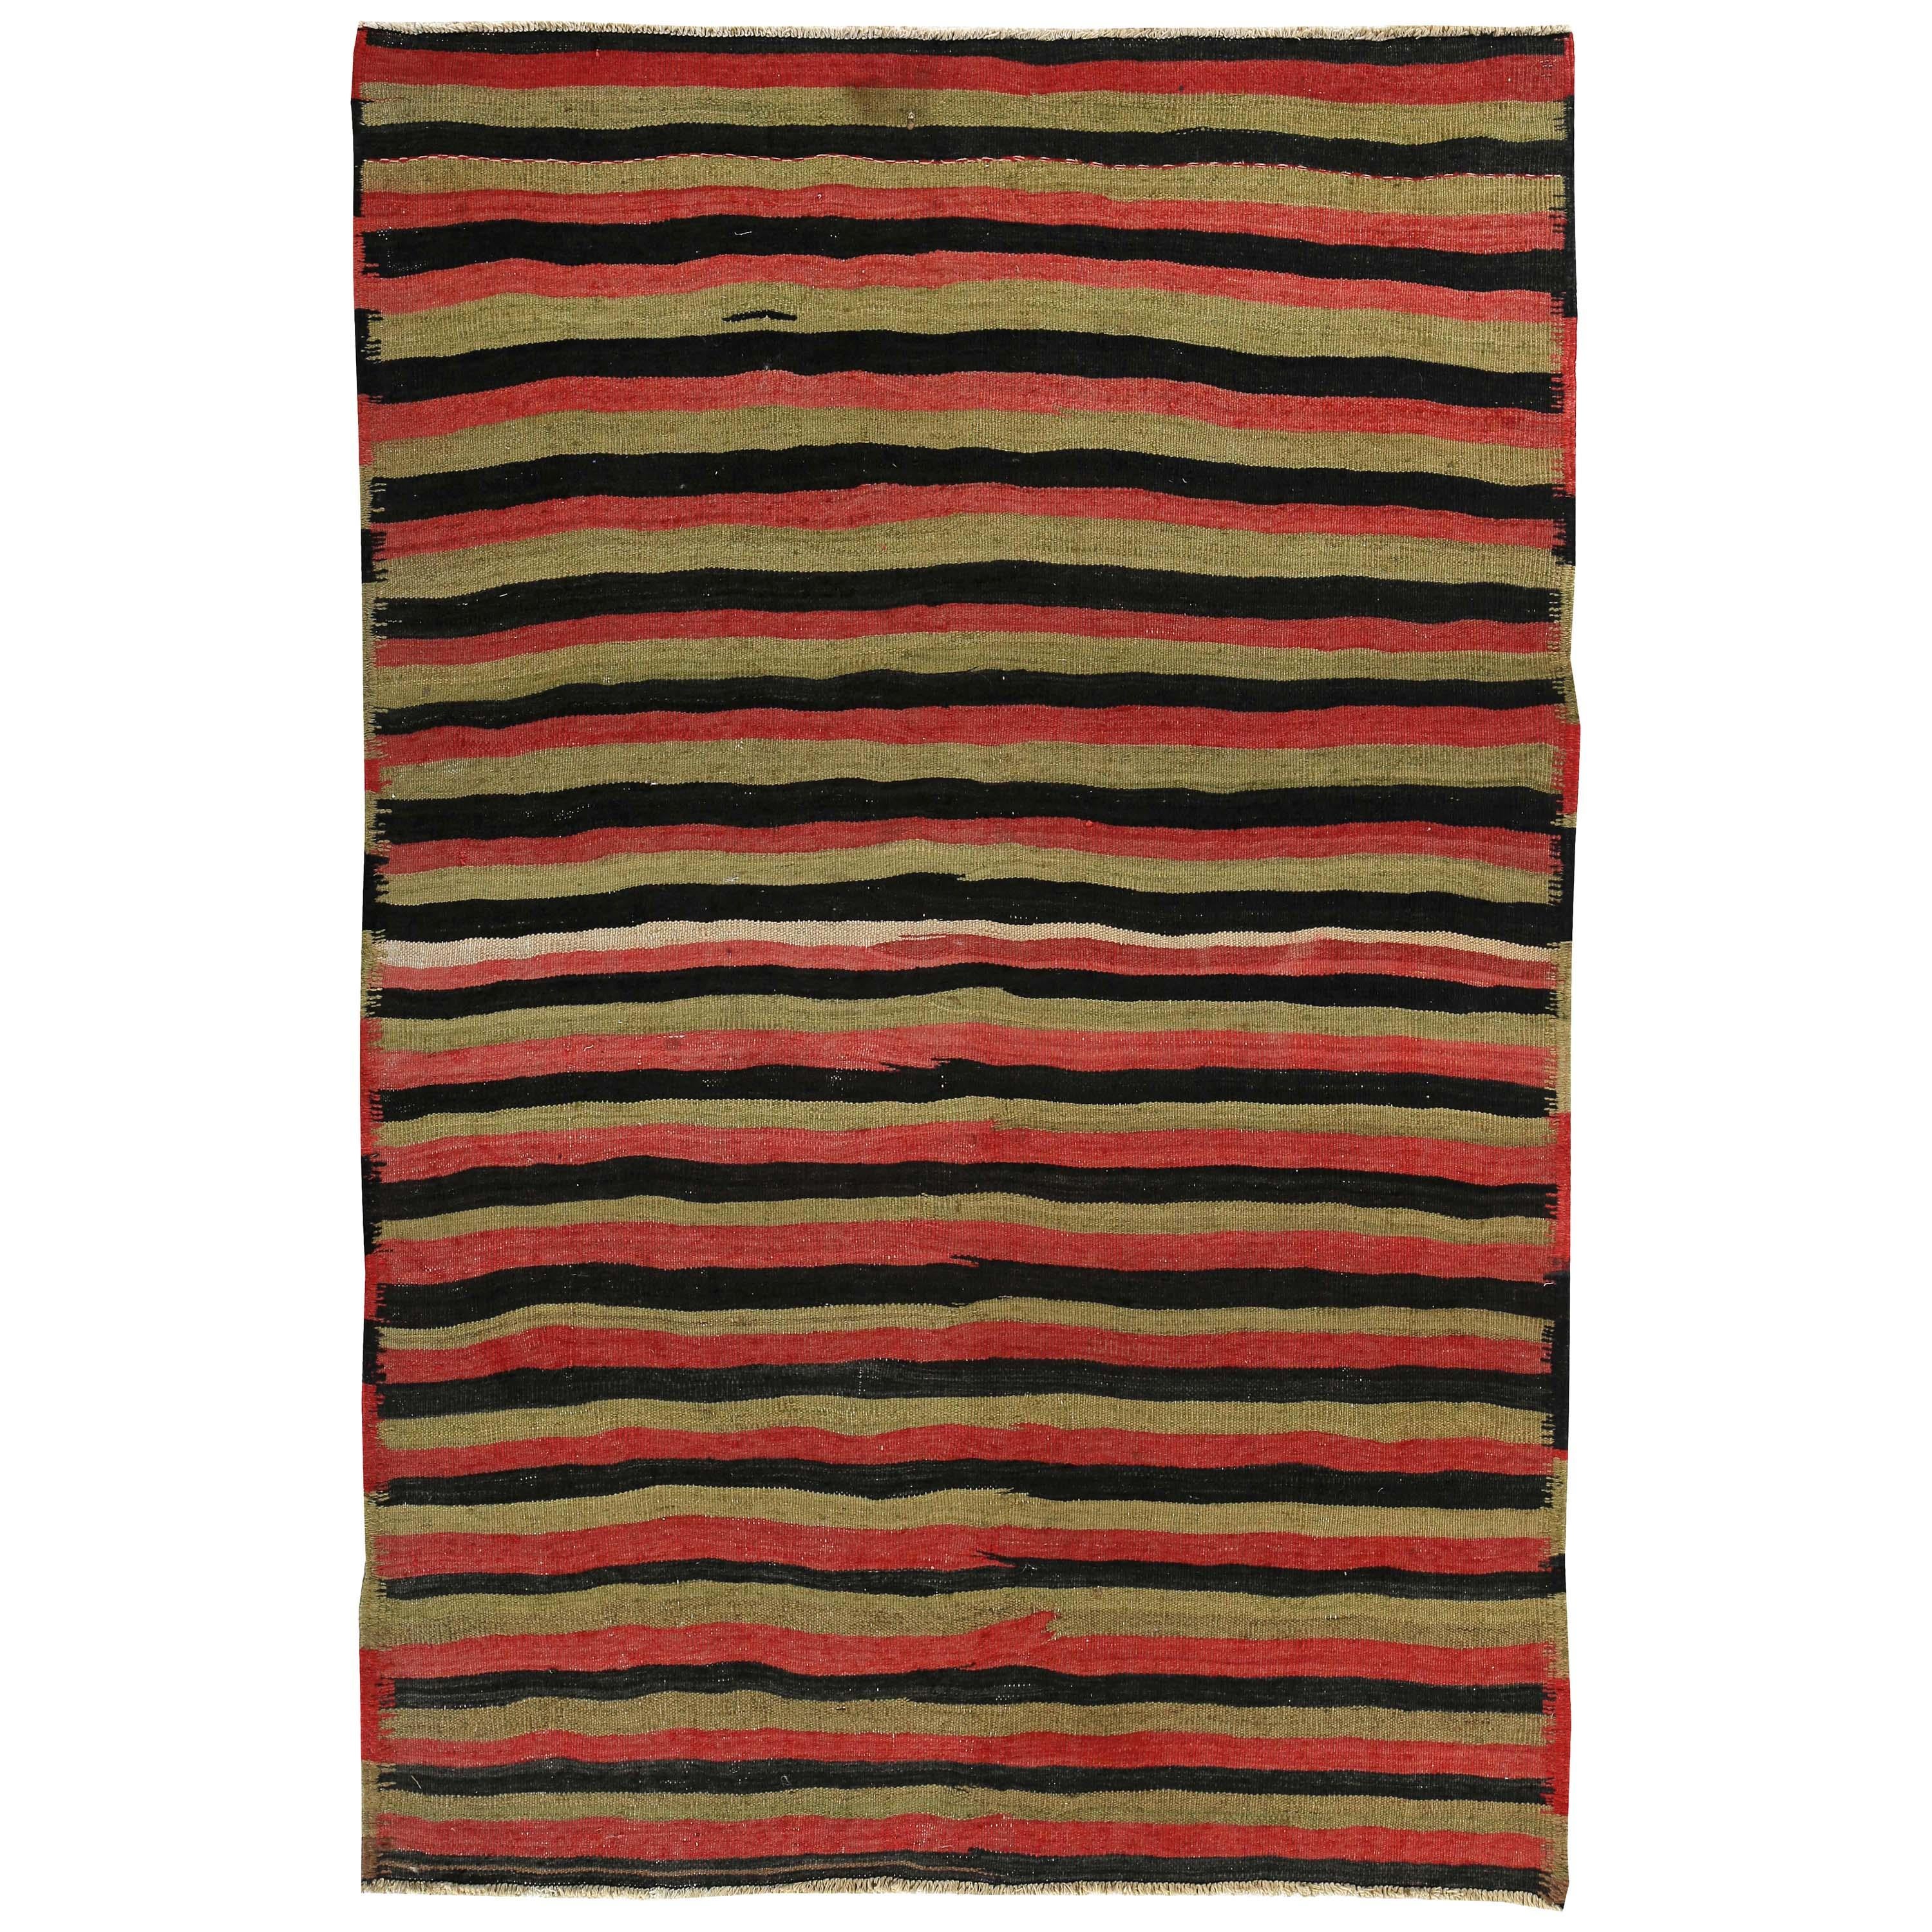 Turkish Kilim Rug with Black and Red Tribal Stripes on Gold Field For Sale